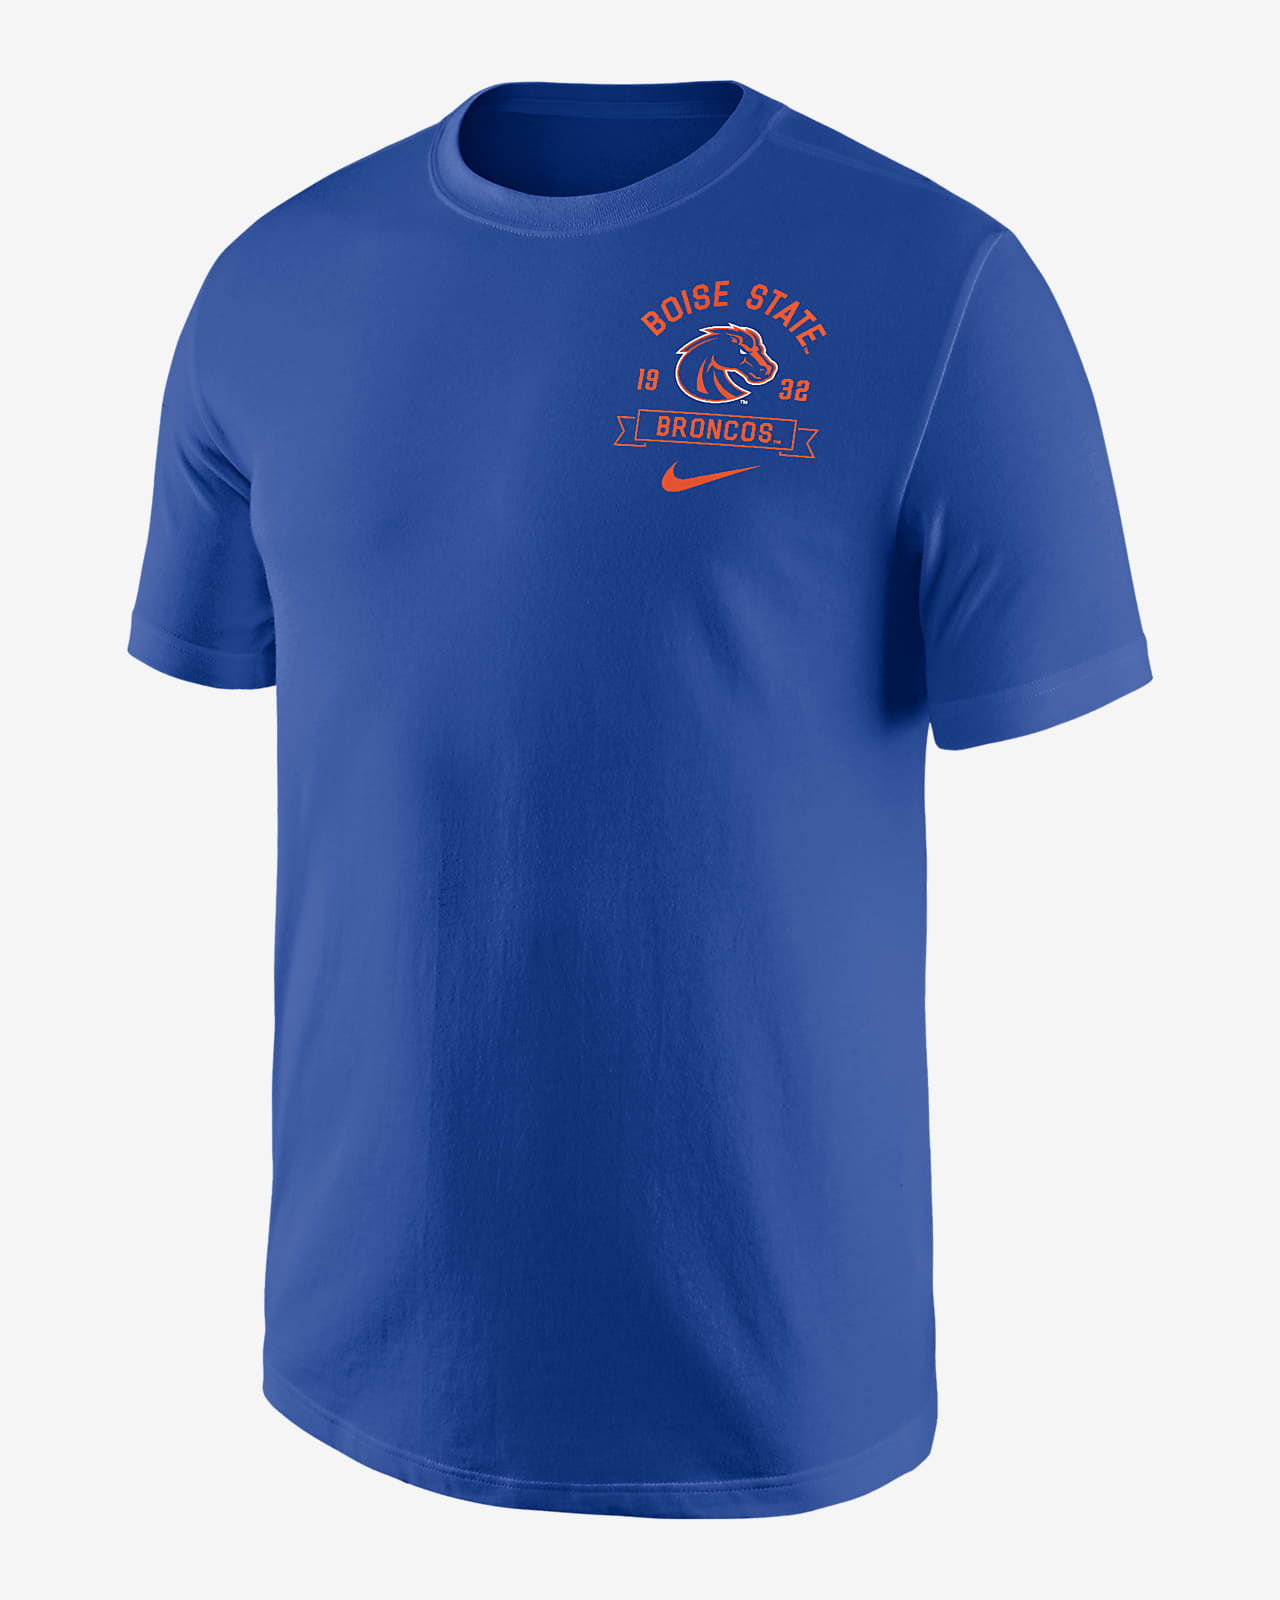 Boise State Men's Nike College Max90 T-Shirt